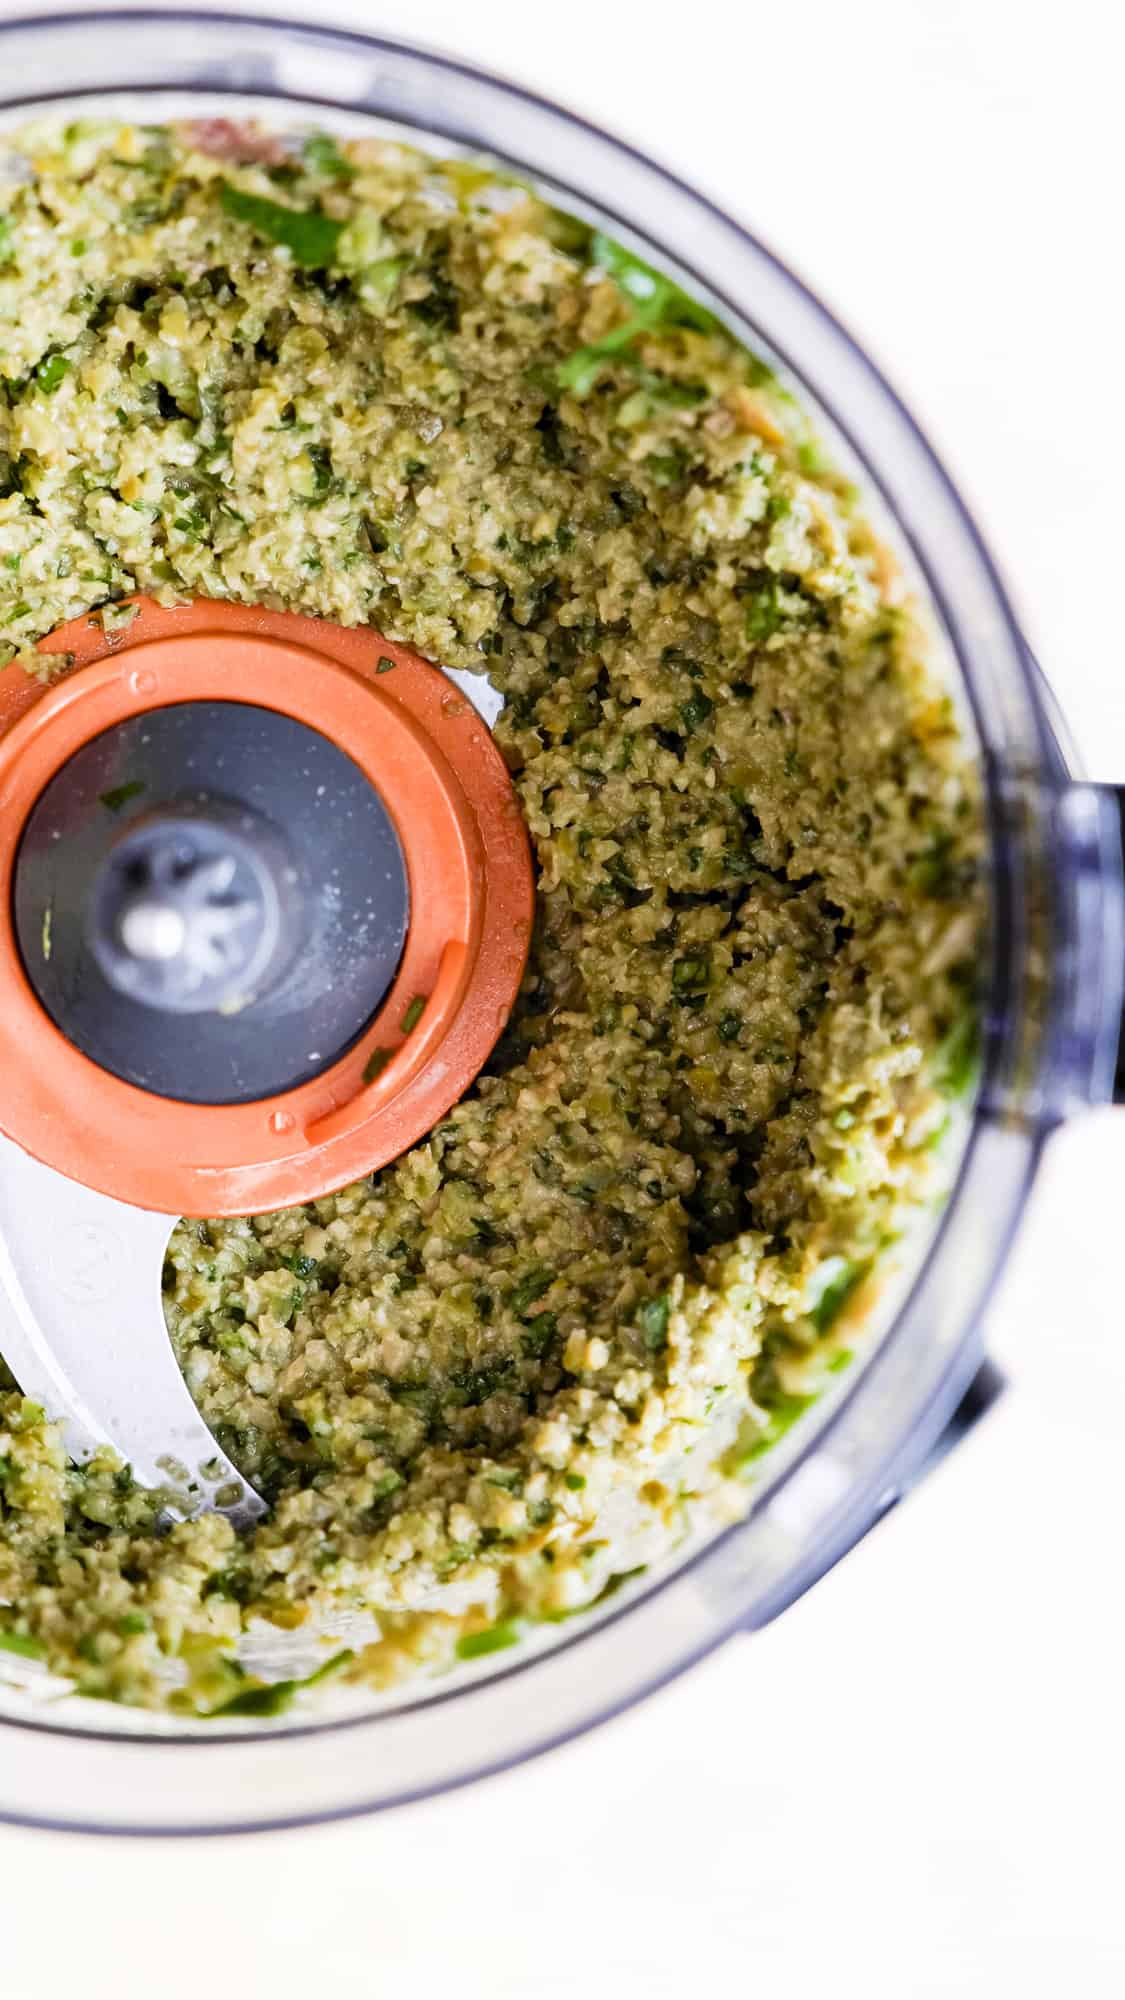 Tapenade ingredients chopped in a food processor.